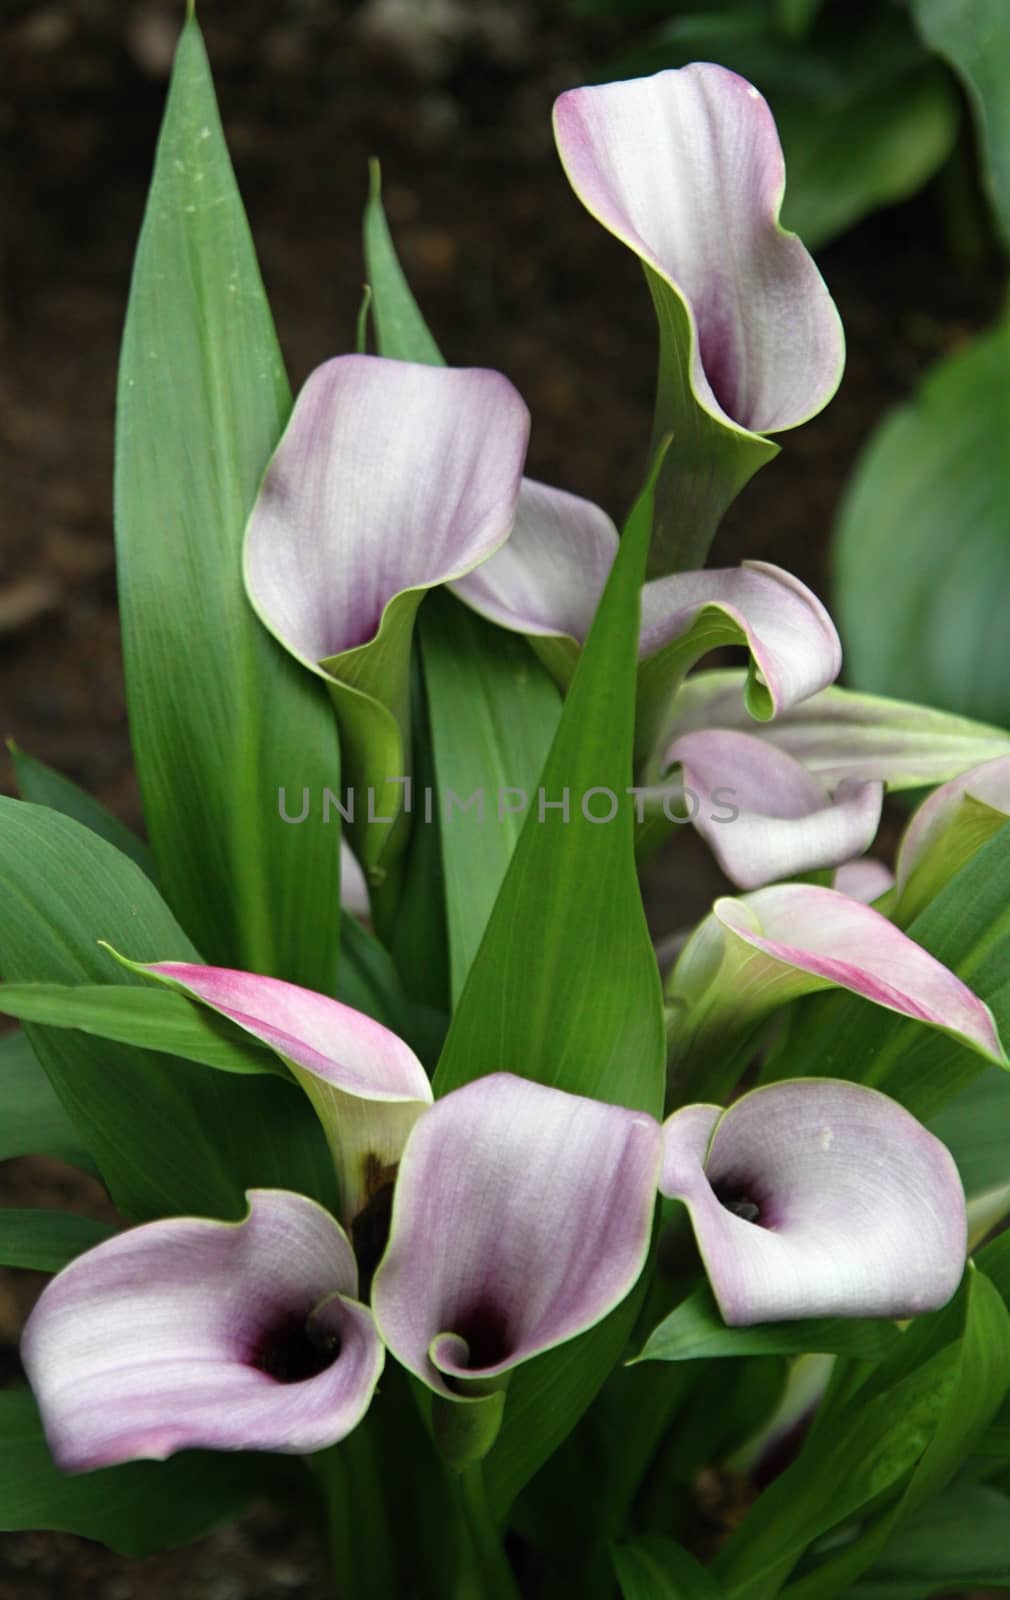 Violet calla lilies and green leaves on the background